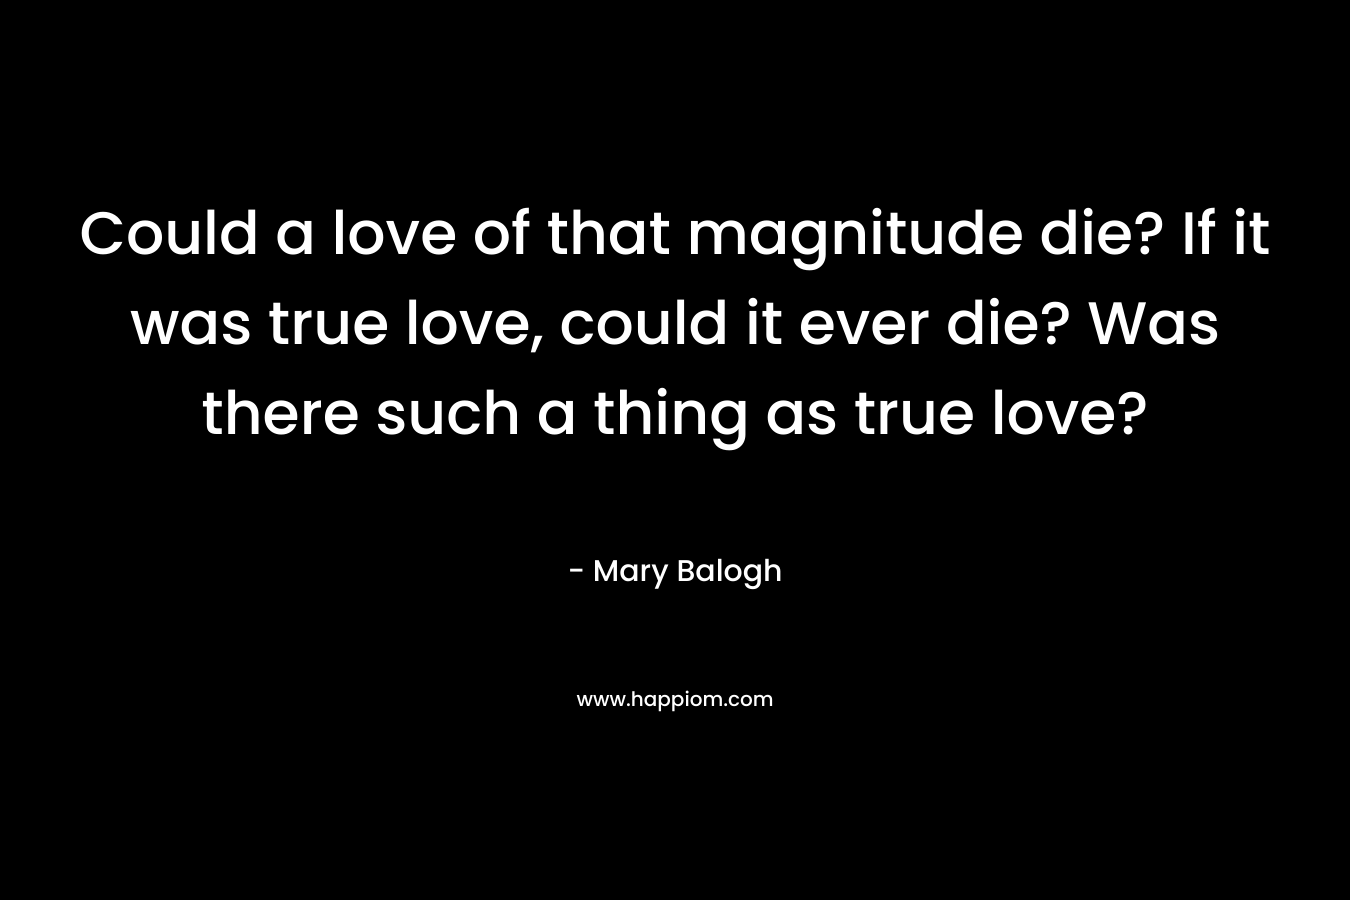 Could a love of that magnitude die? If it was true love, could it ever die? Was there such a thing as true love?